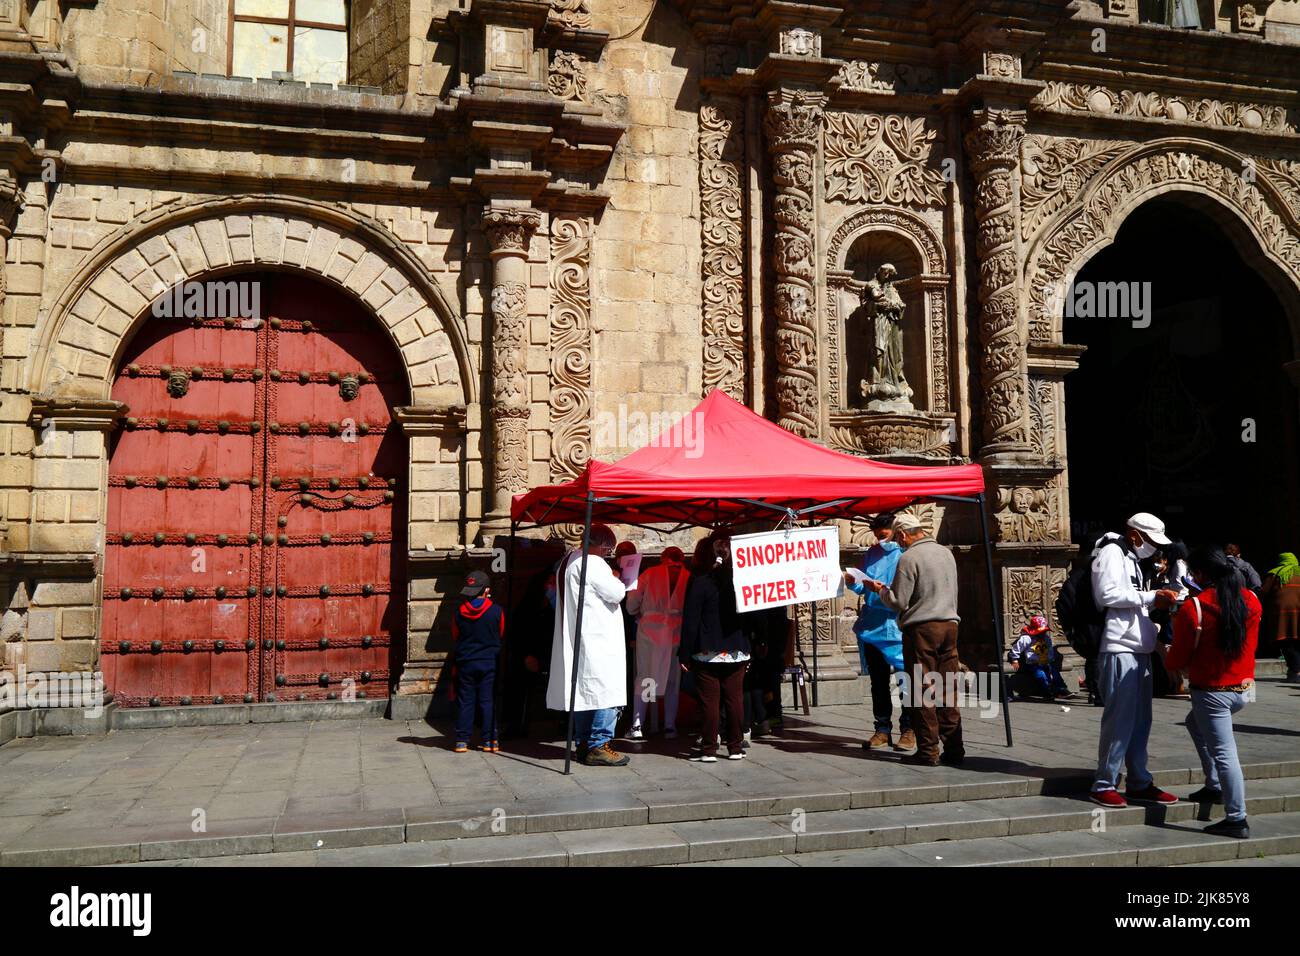 La Paz, Bolivia. 31st July 2022. A temporary vaccination centre offering 3rd and 4th doses of the Sinopharm and Pfizer vaccines for covid-19 outside San Francisco church in the city cente. Bolivia has been experiencing increased numbers of covid cases in the last few weeks, the country's 5th wave. Stock Photo